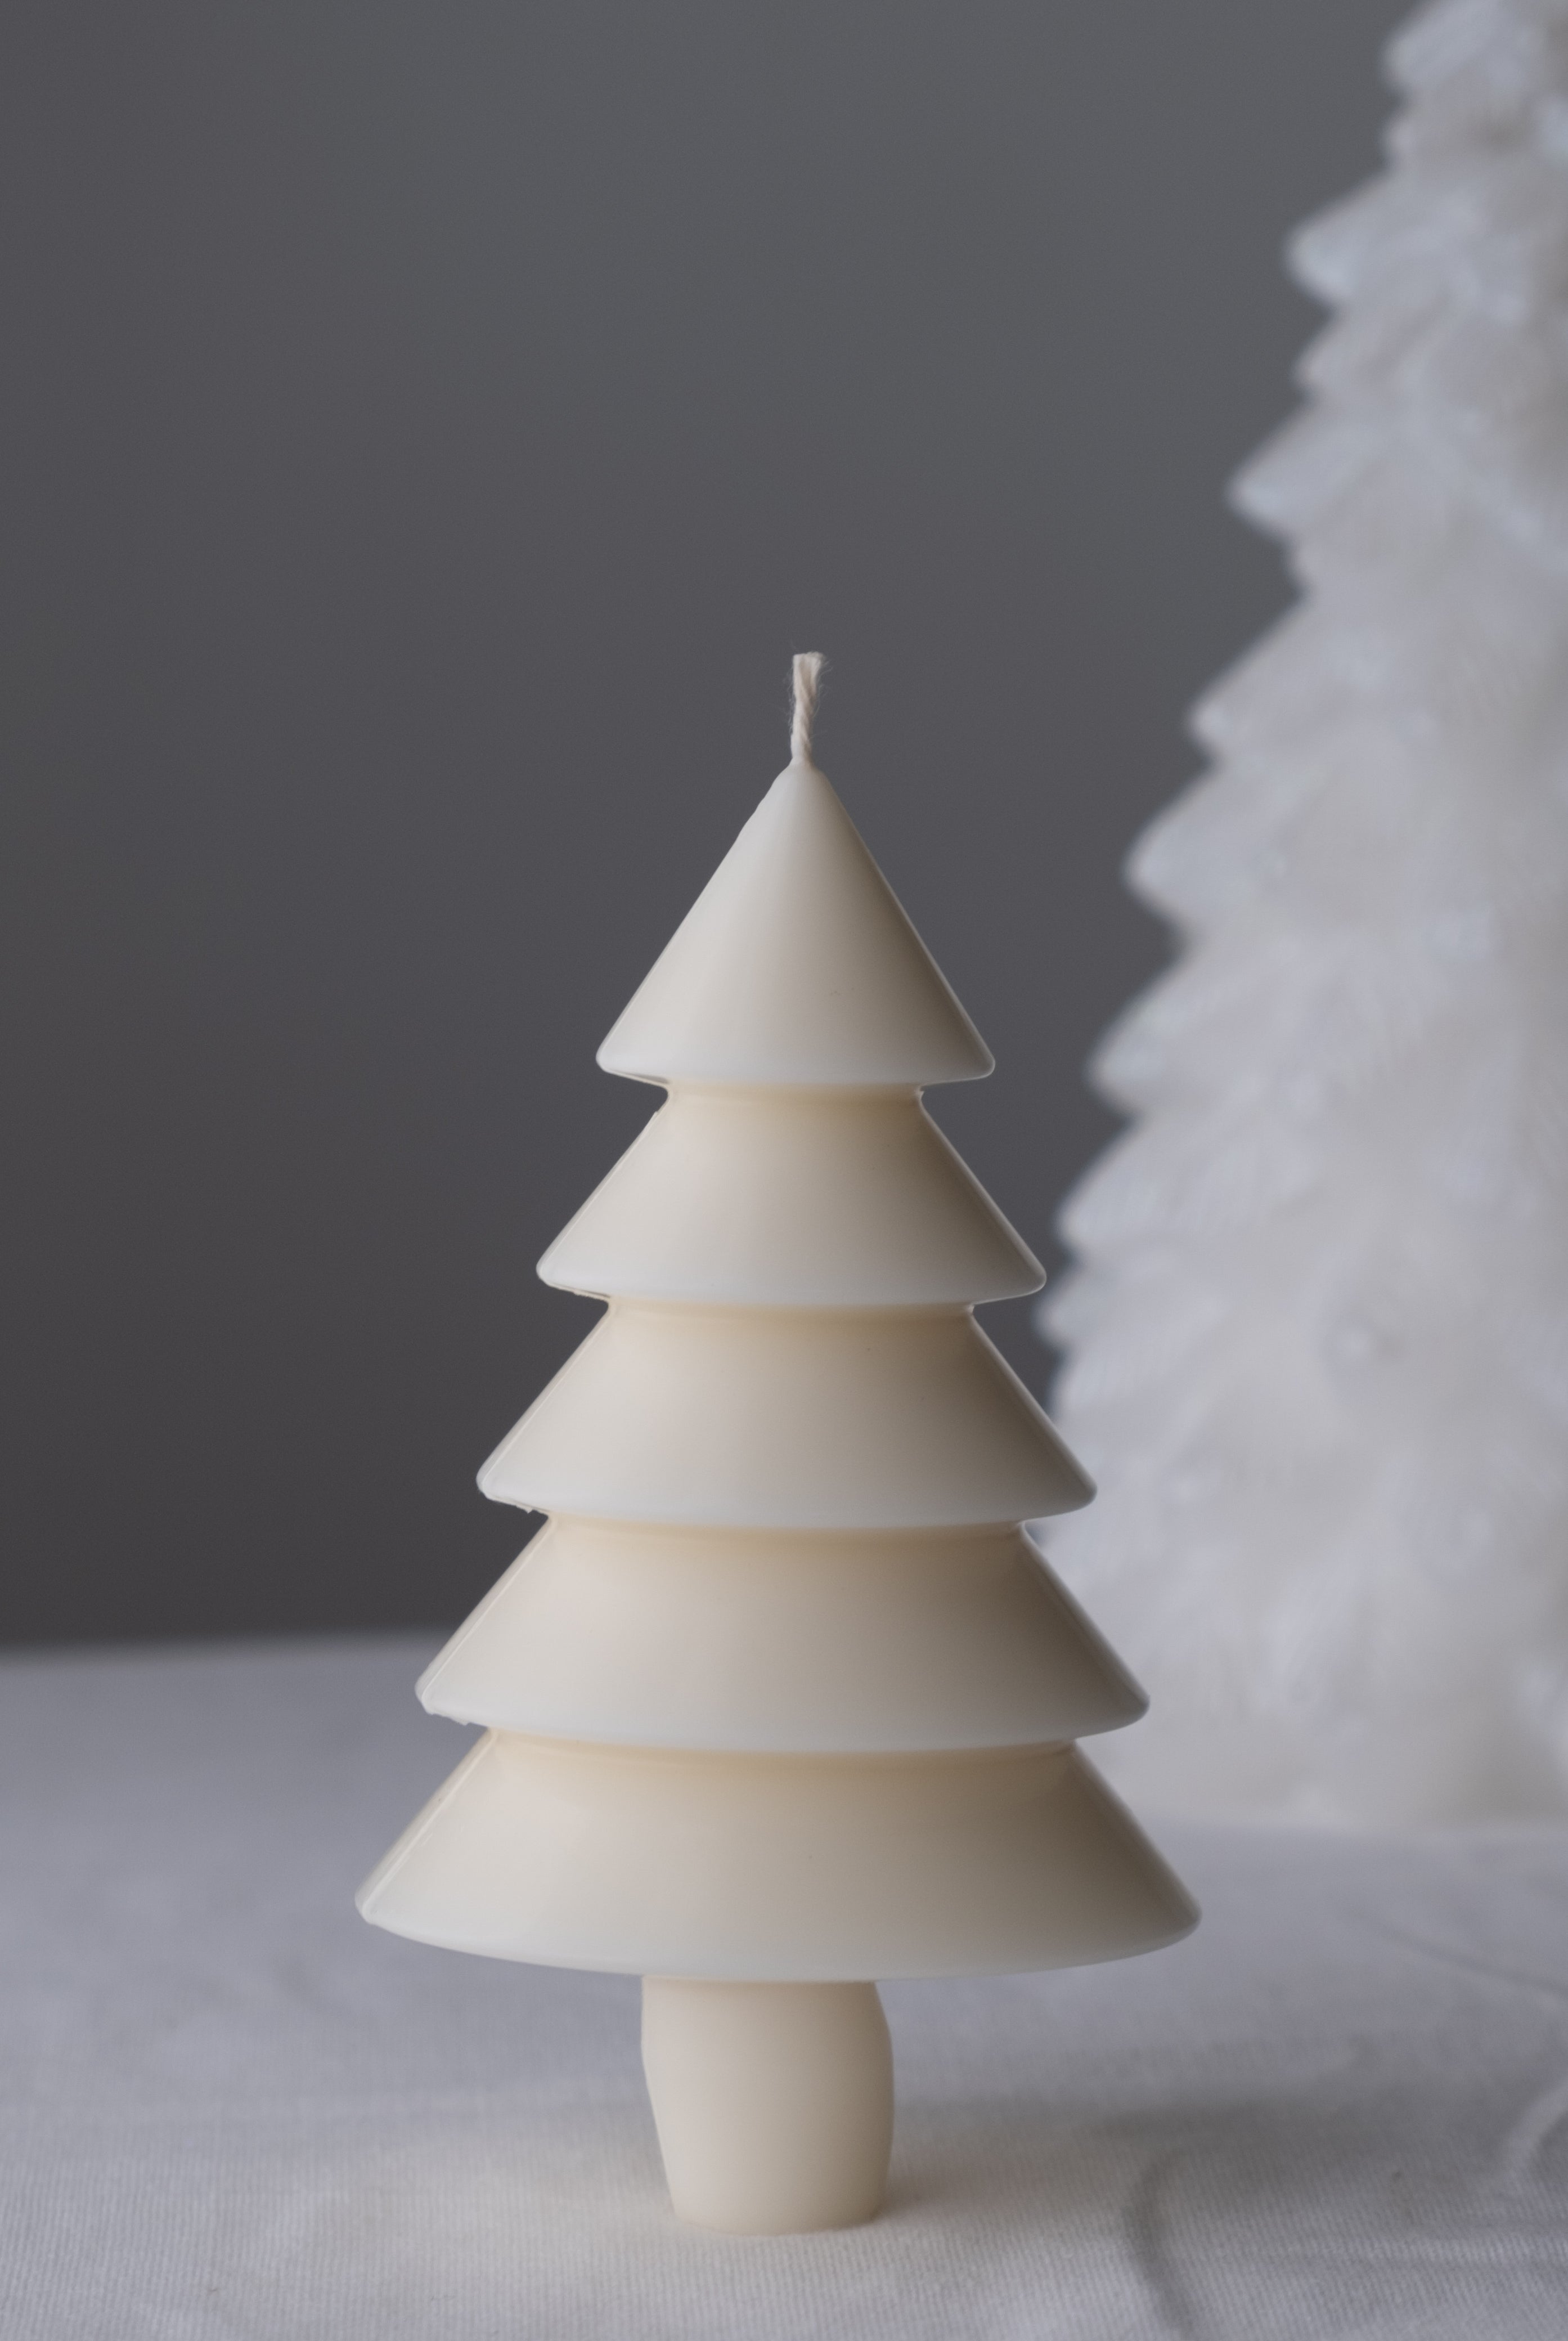 Tiered Christmas Tree Candle Mould 0 - Silicone Mould, Mold for DIY Candles. Created using candle making kit with cotton candle wicks and candle colour chips. Using soy wax for pillar candles. Sold by Myka Candles Moulds Australia